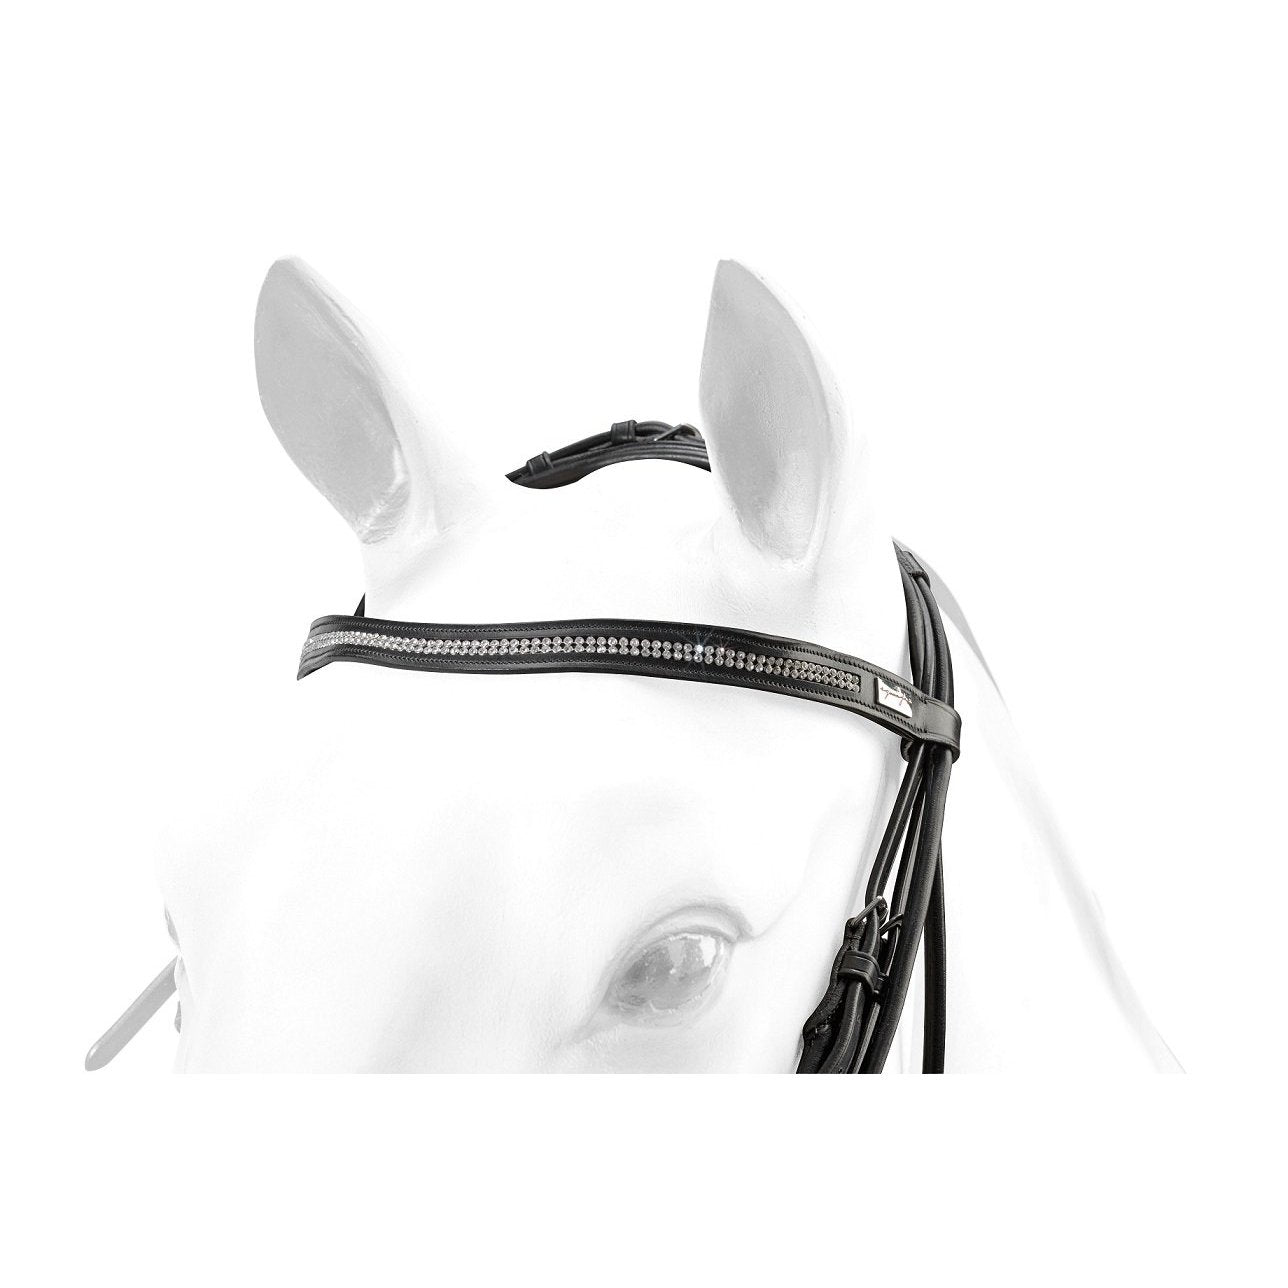 Equipe bridle on horse, black leather, crystal browband, high-quality, close-up.